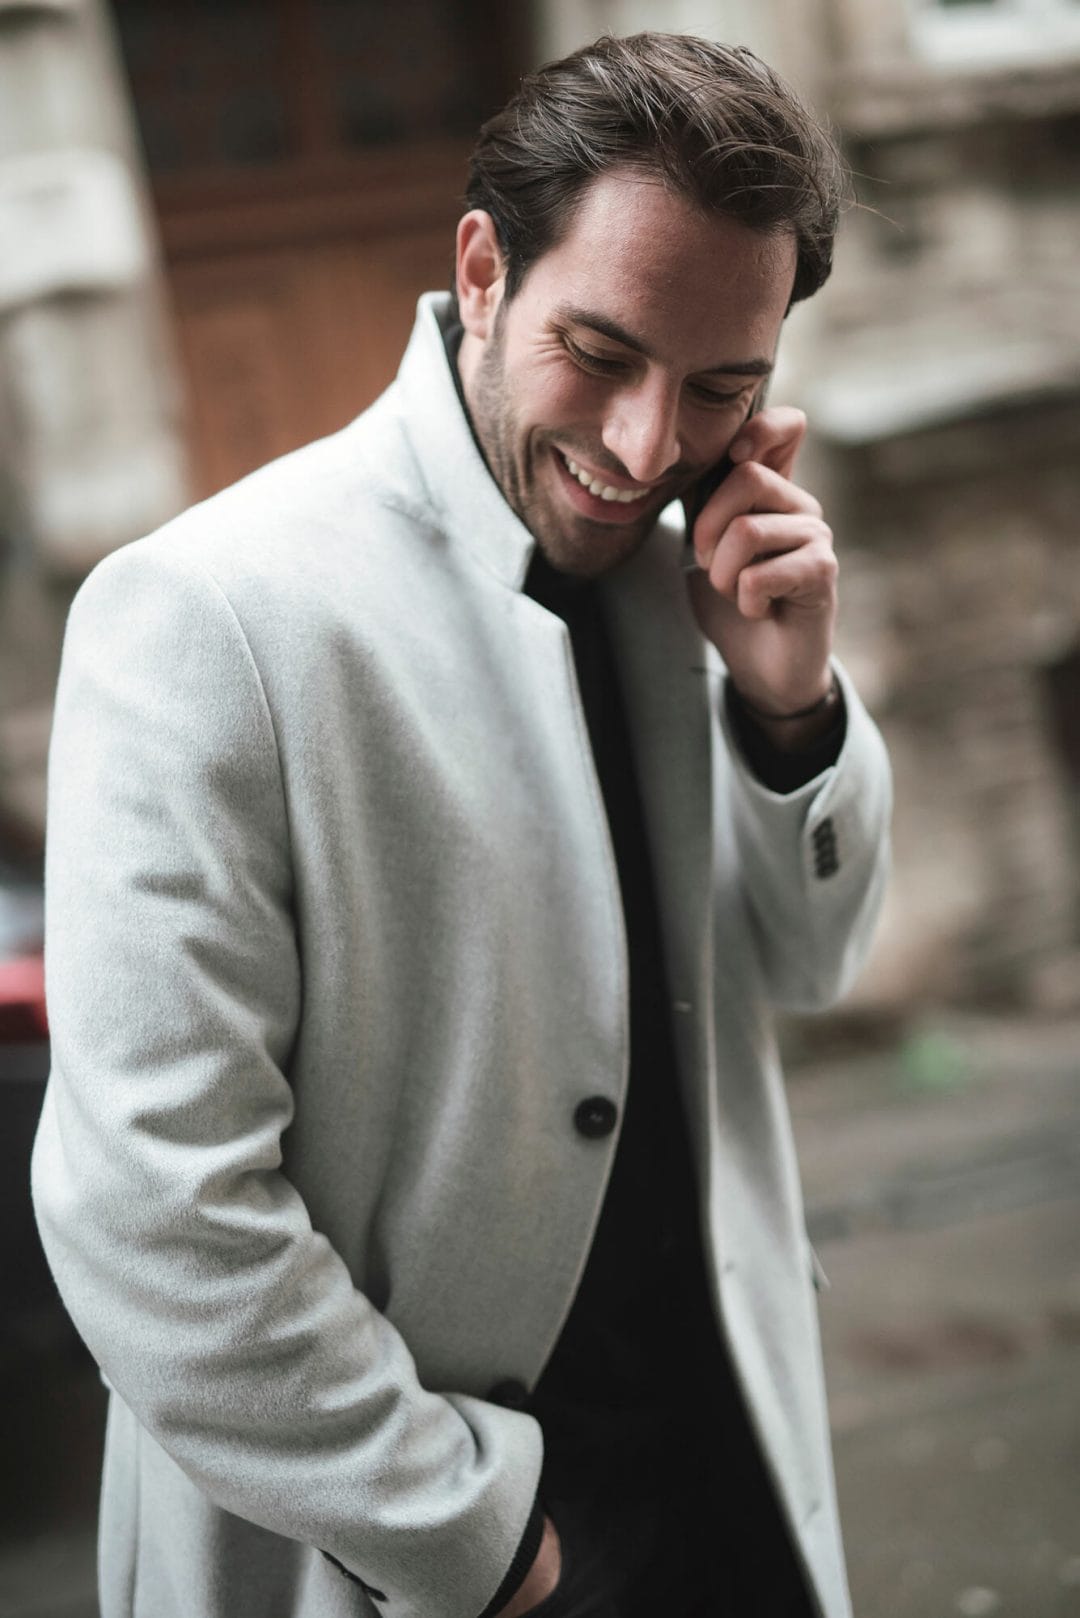 man talking on phone white coat street photography portrait city people camera subject light how to tutorial guide 